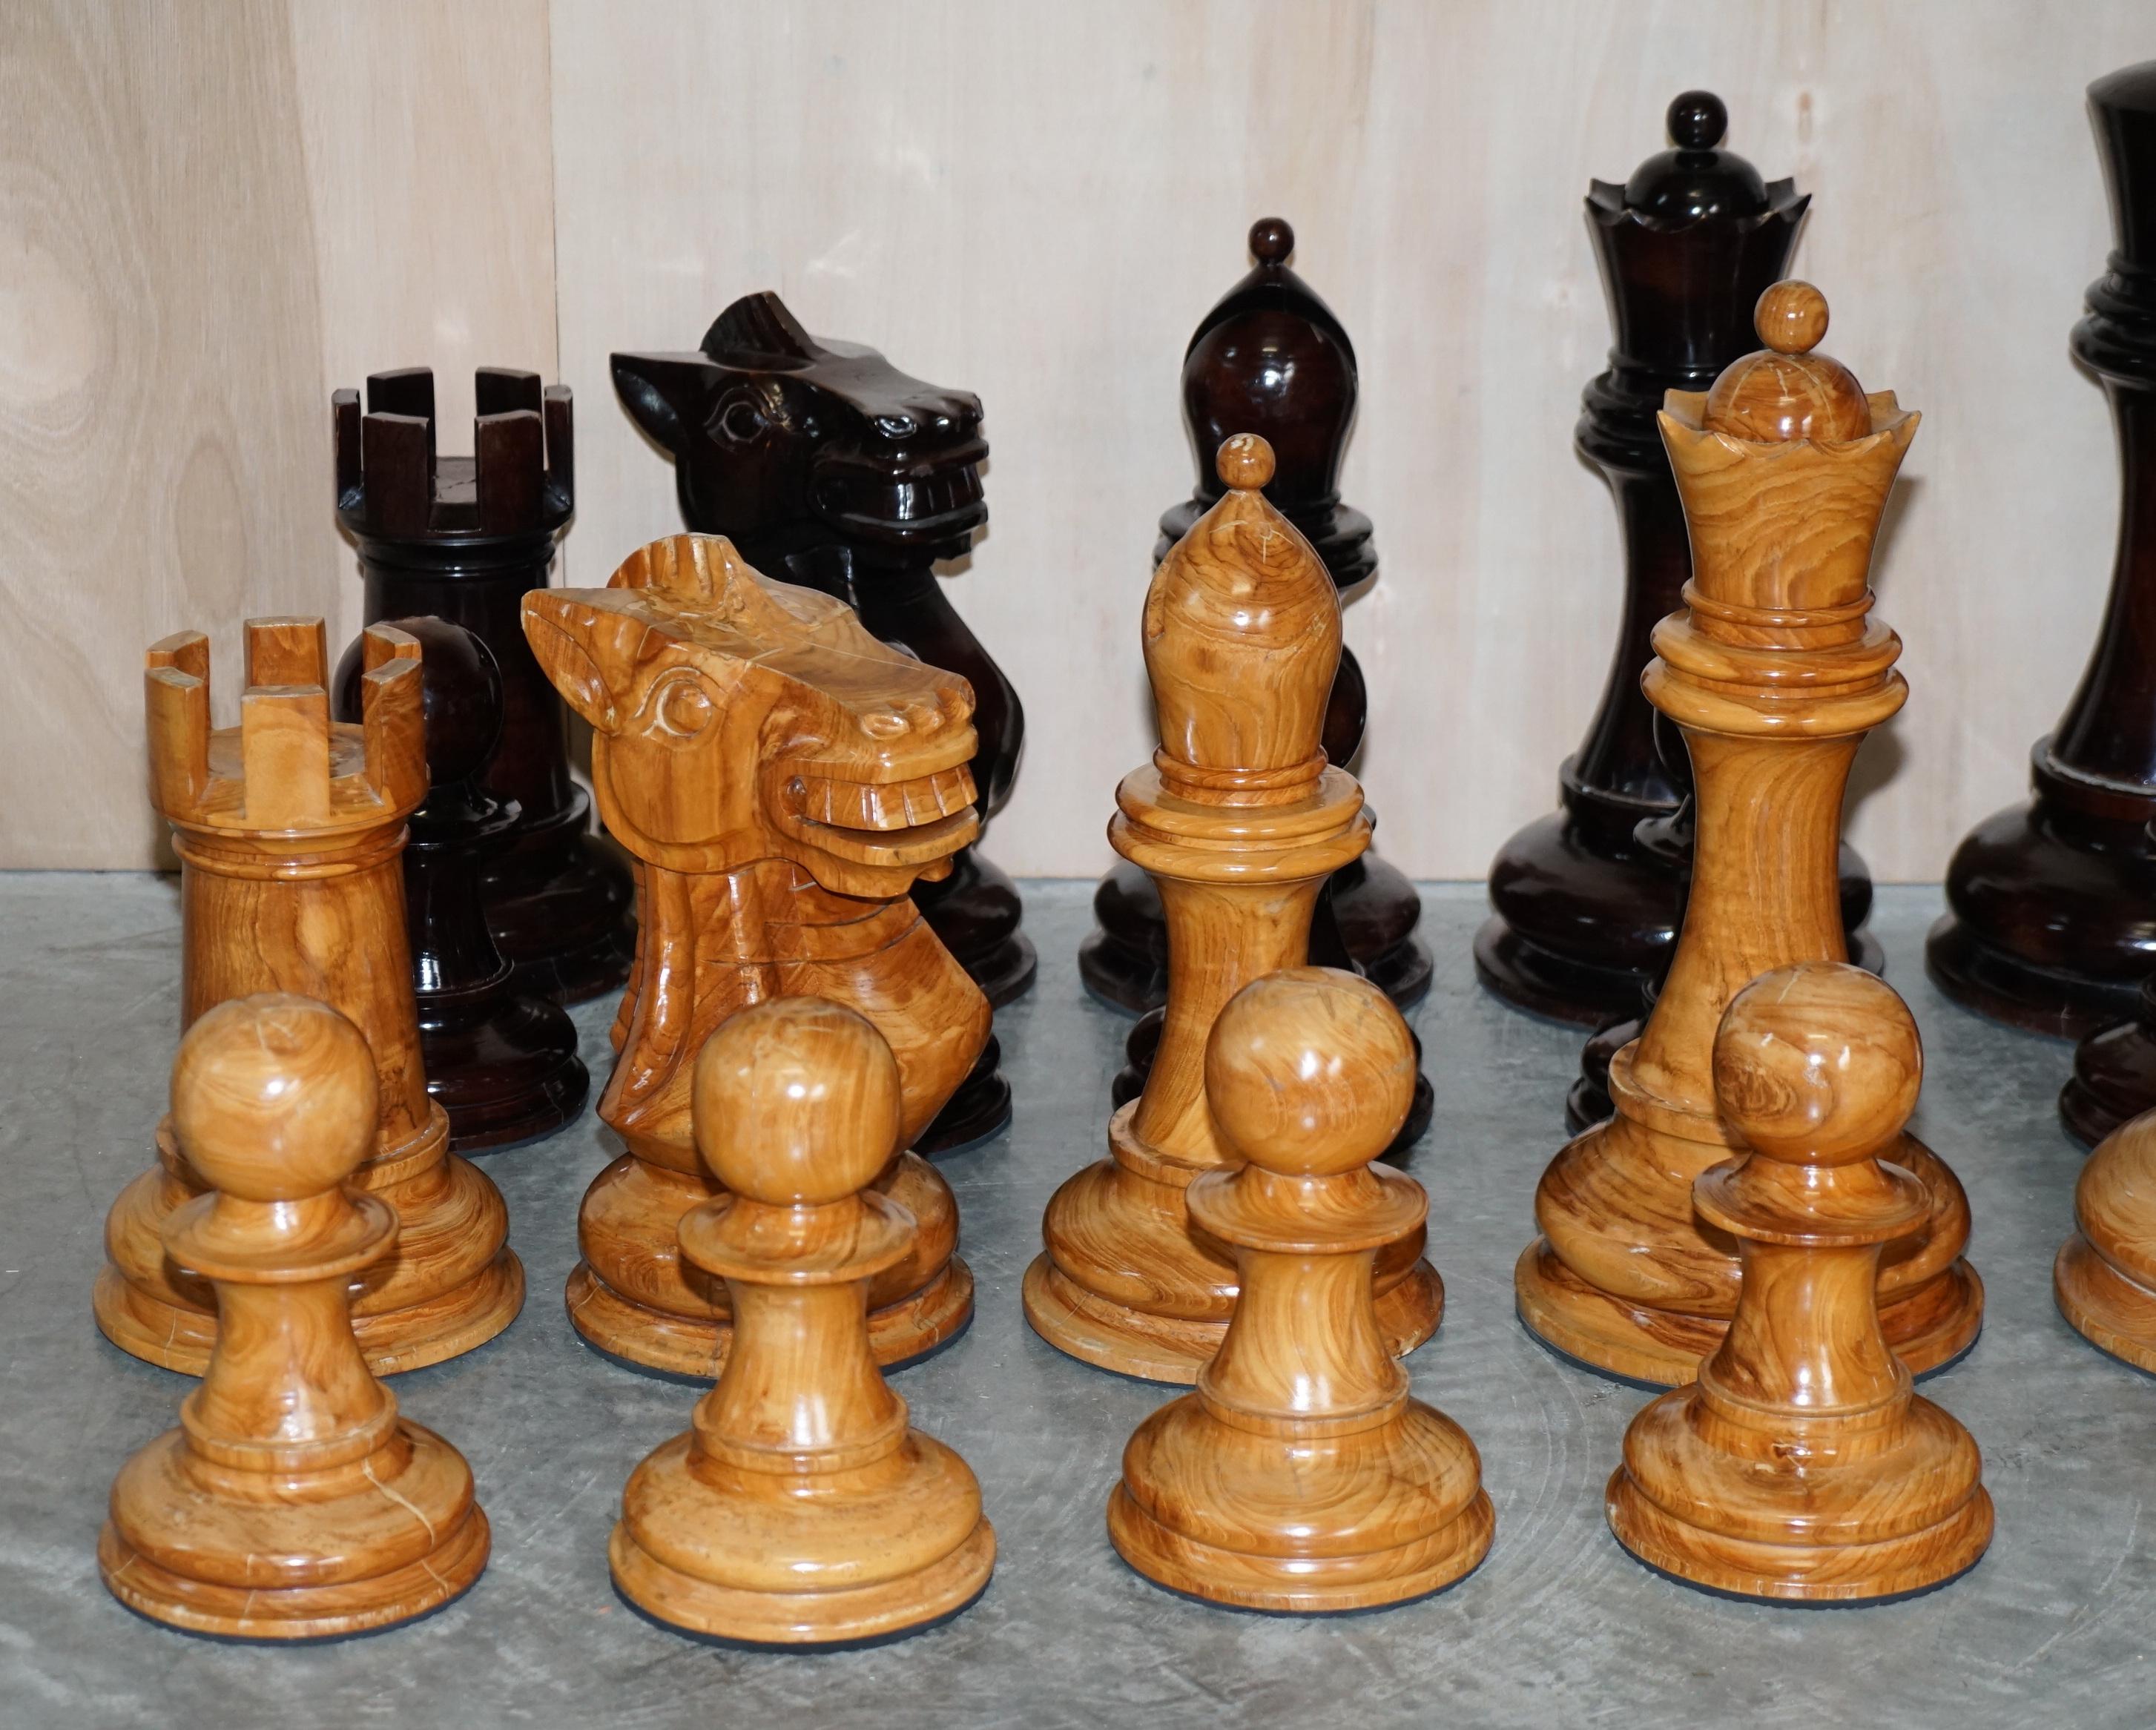 European Giant Hand Carved Wood Chess Set Tallest Piece Beautiful Timber Patina